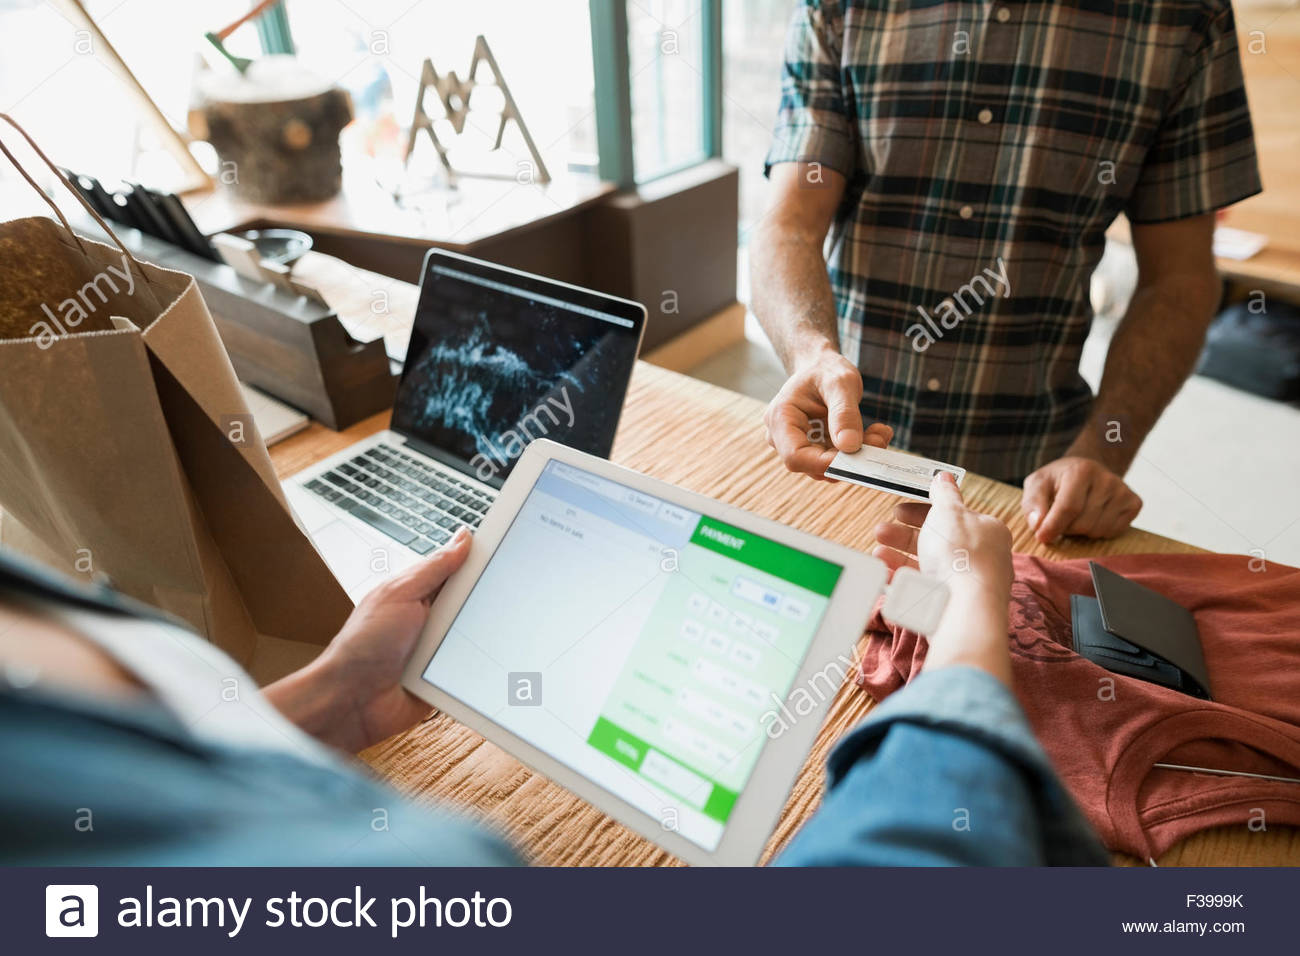 Customer with credit card paying worker digital tablet Stock Photo